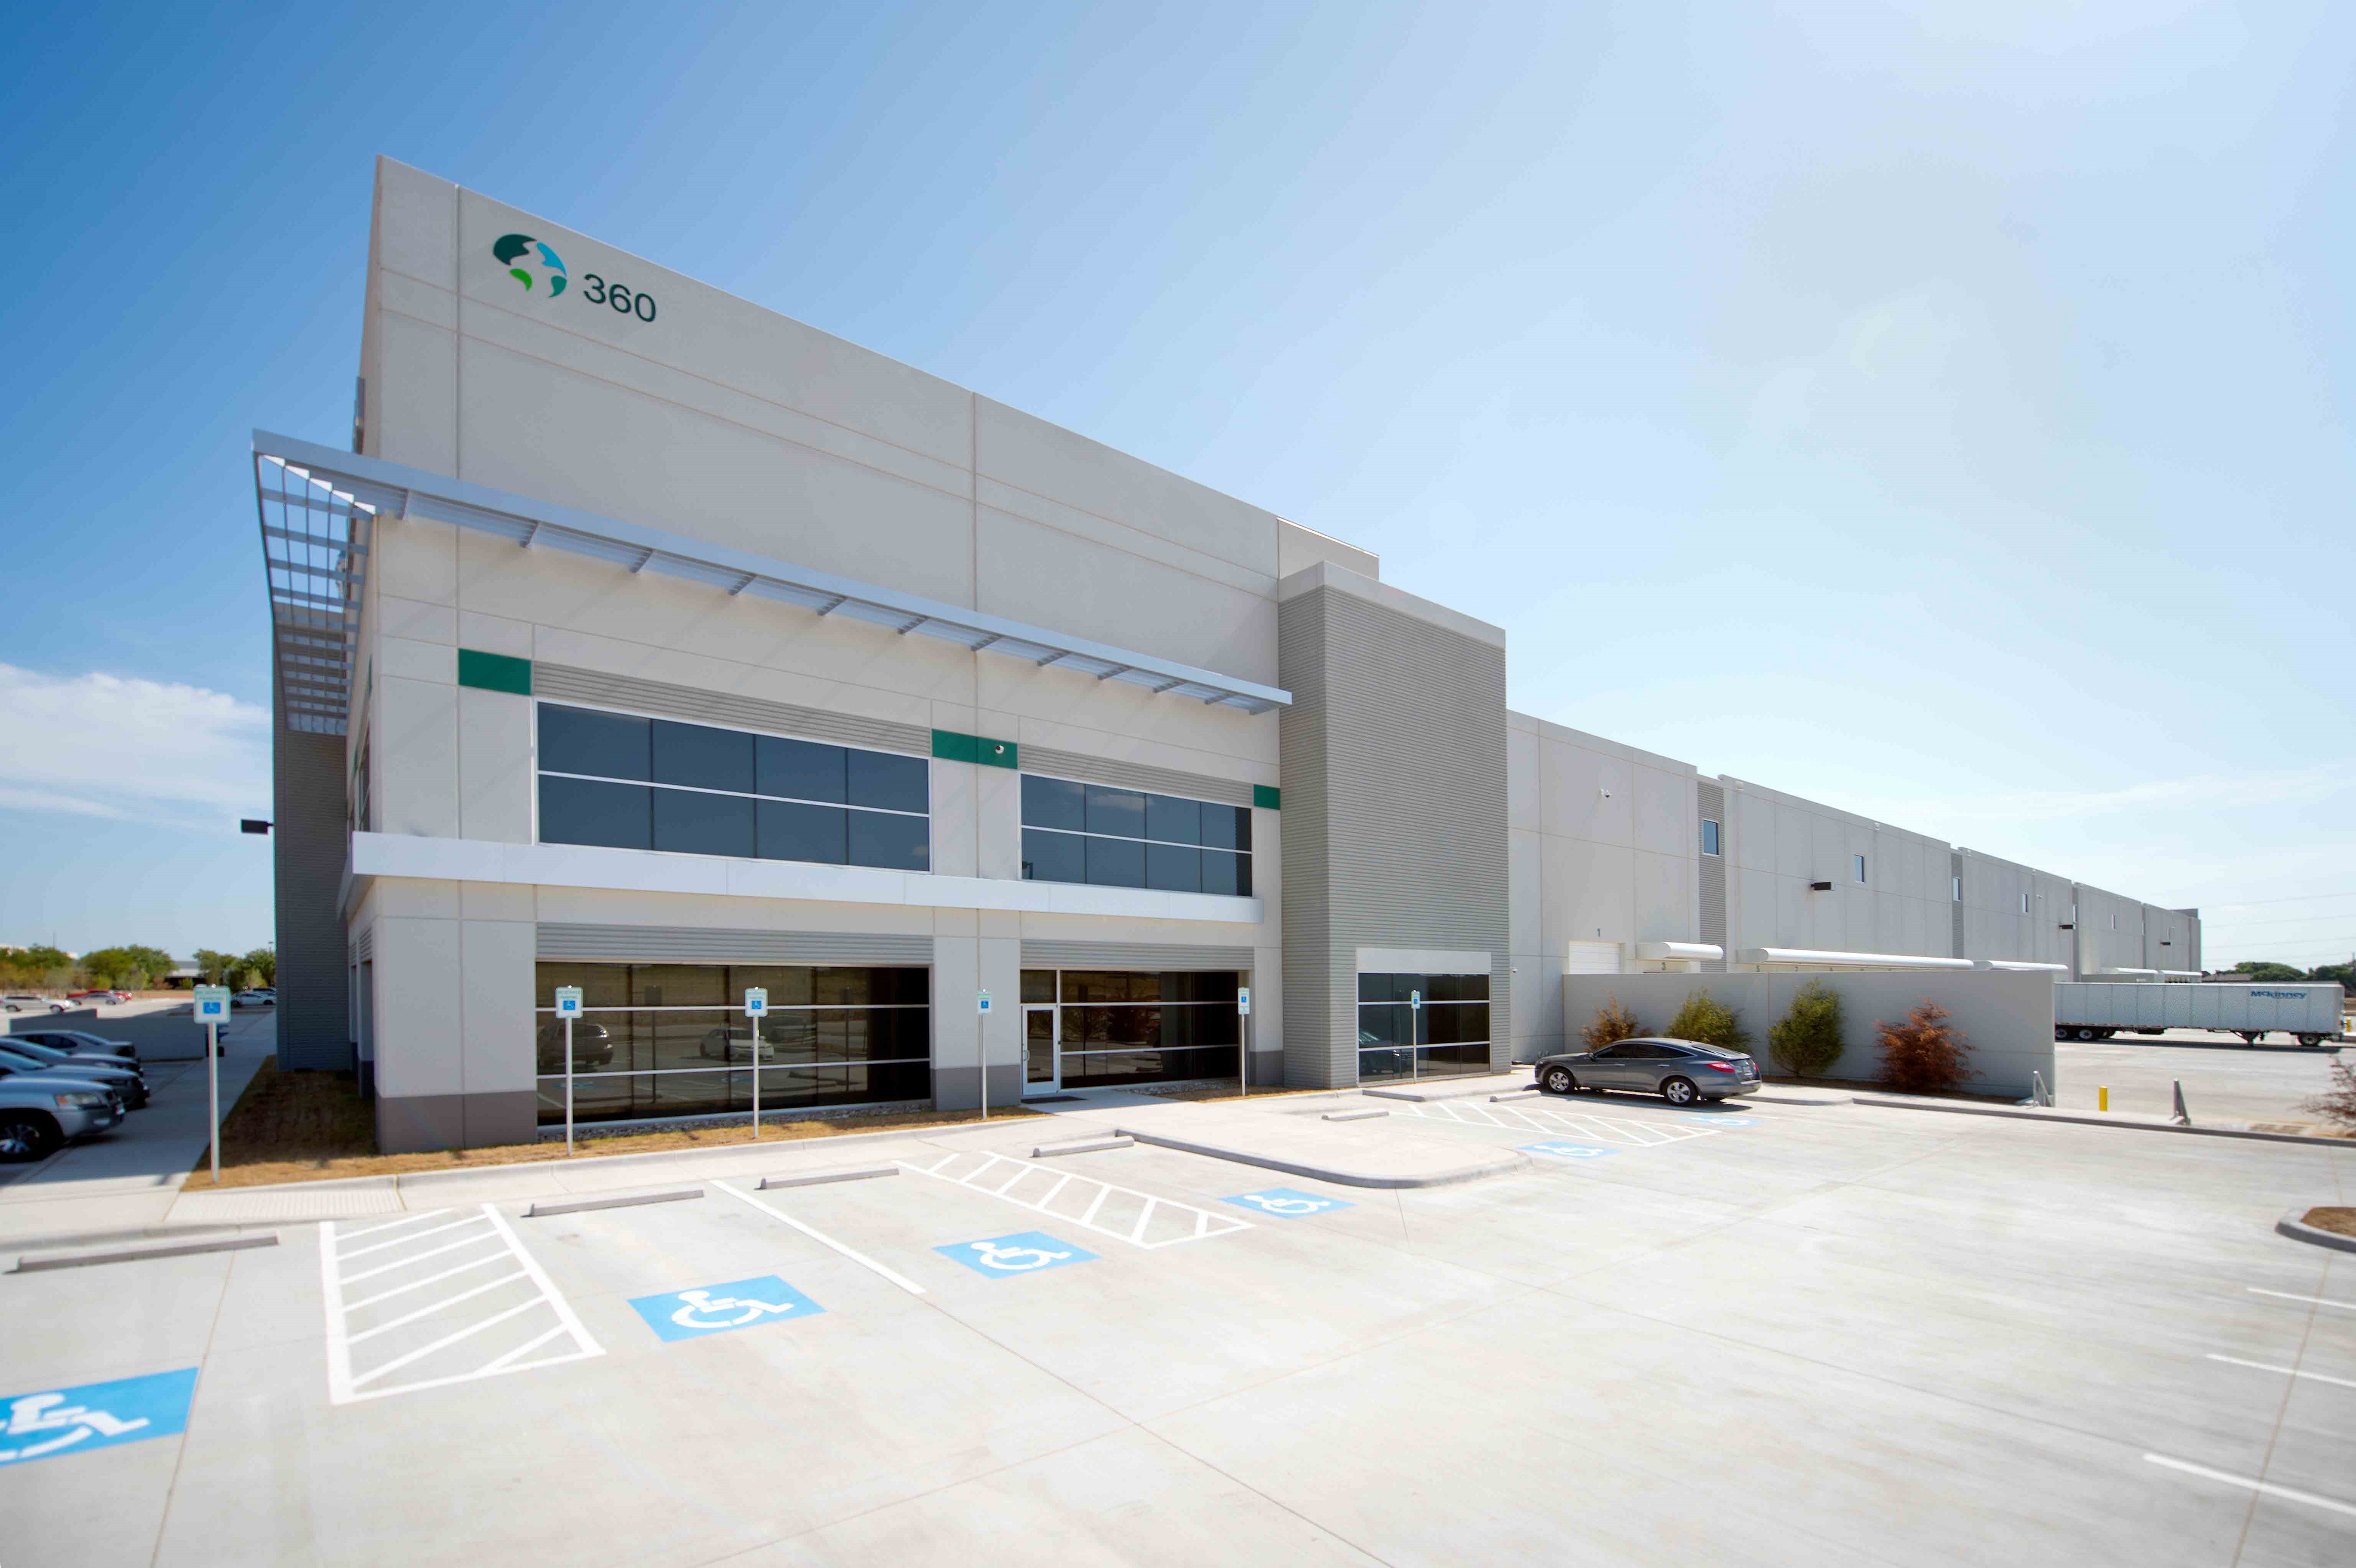 Coppel to Grow Distribution Center in Mexico